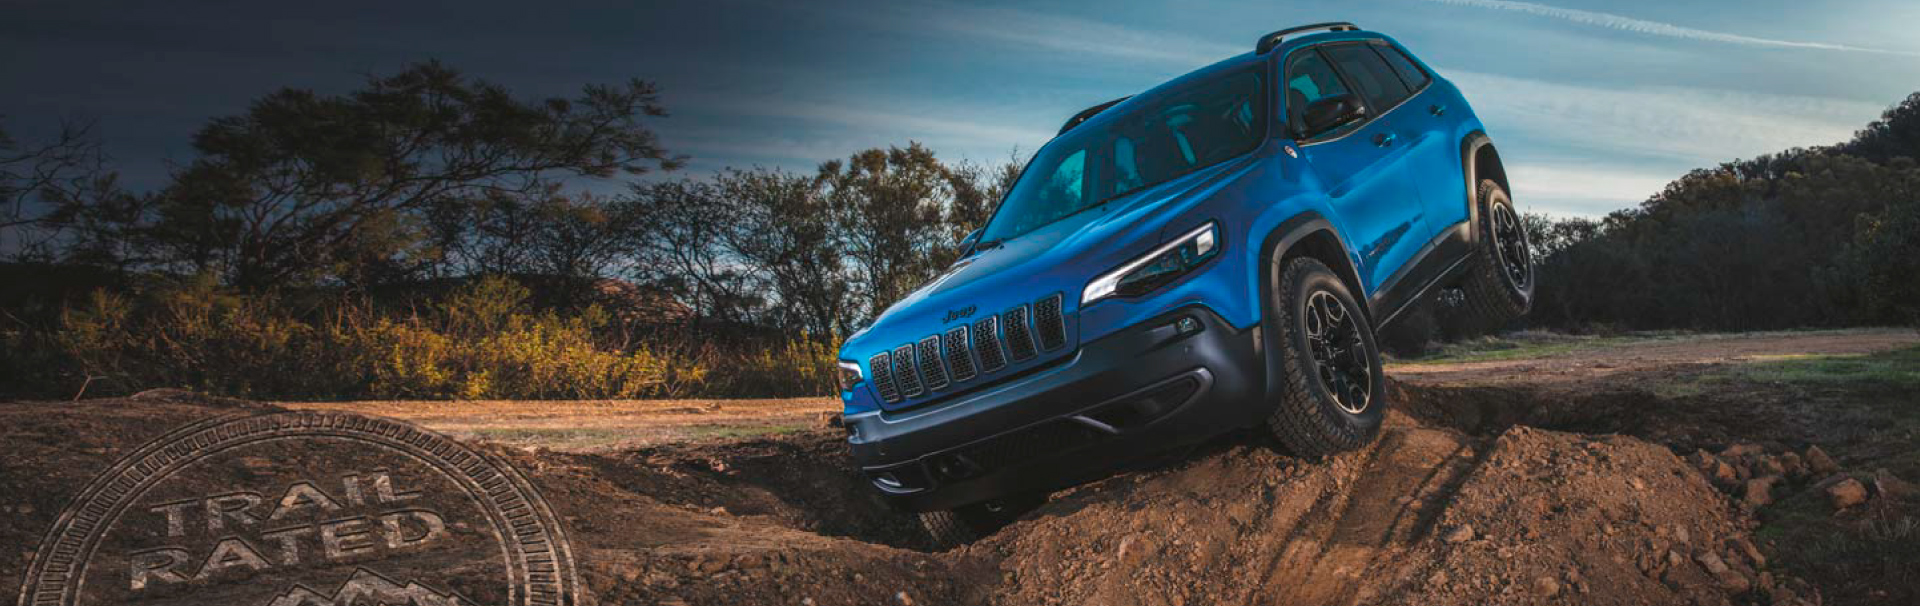 Jeep® Trail Rated